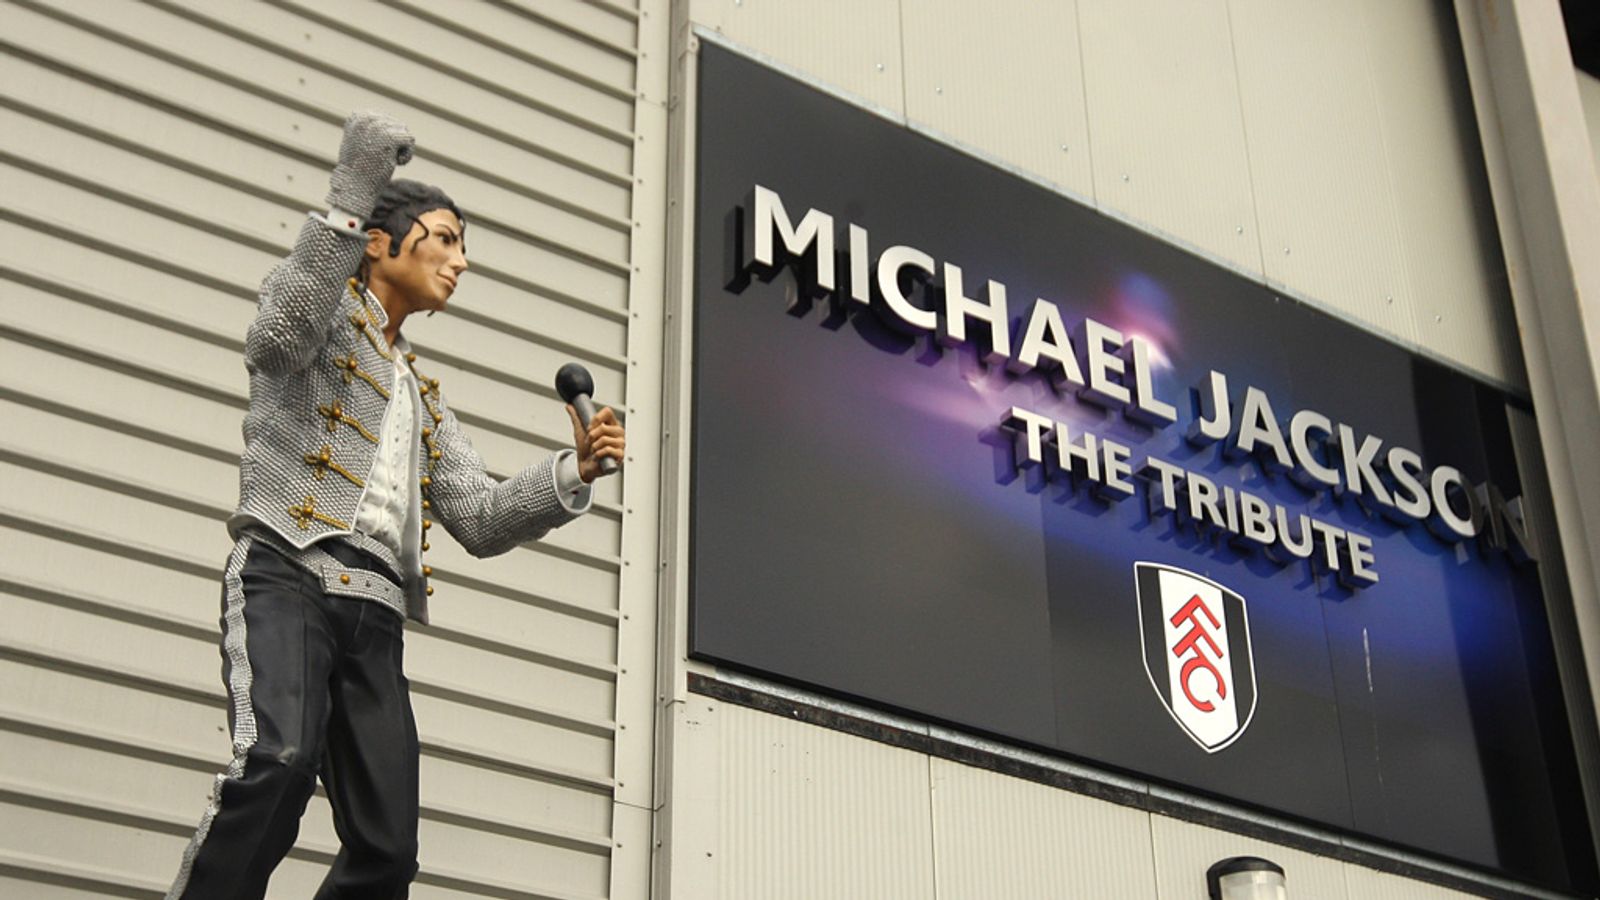 Fulham's Michael Jackson statue will be returned to former owner Mohamed Al Fayed | Football News | Sky Sports